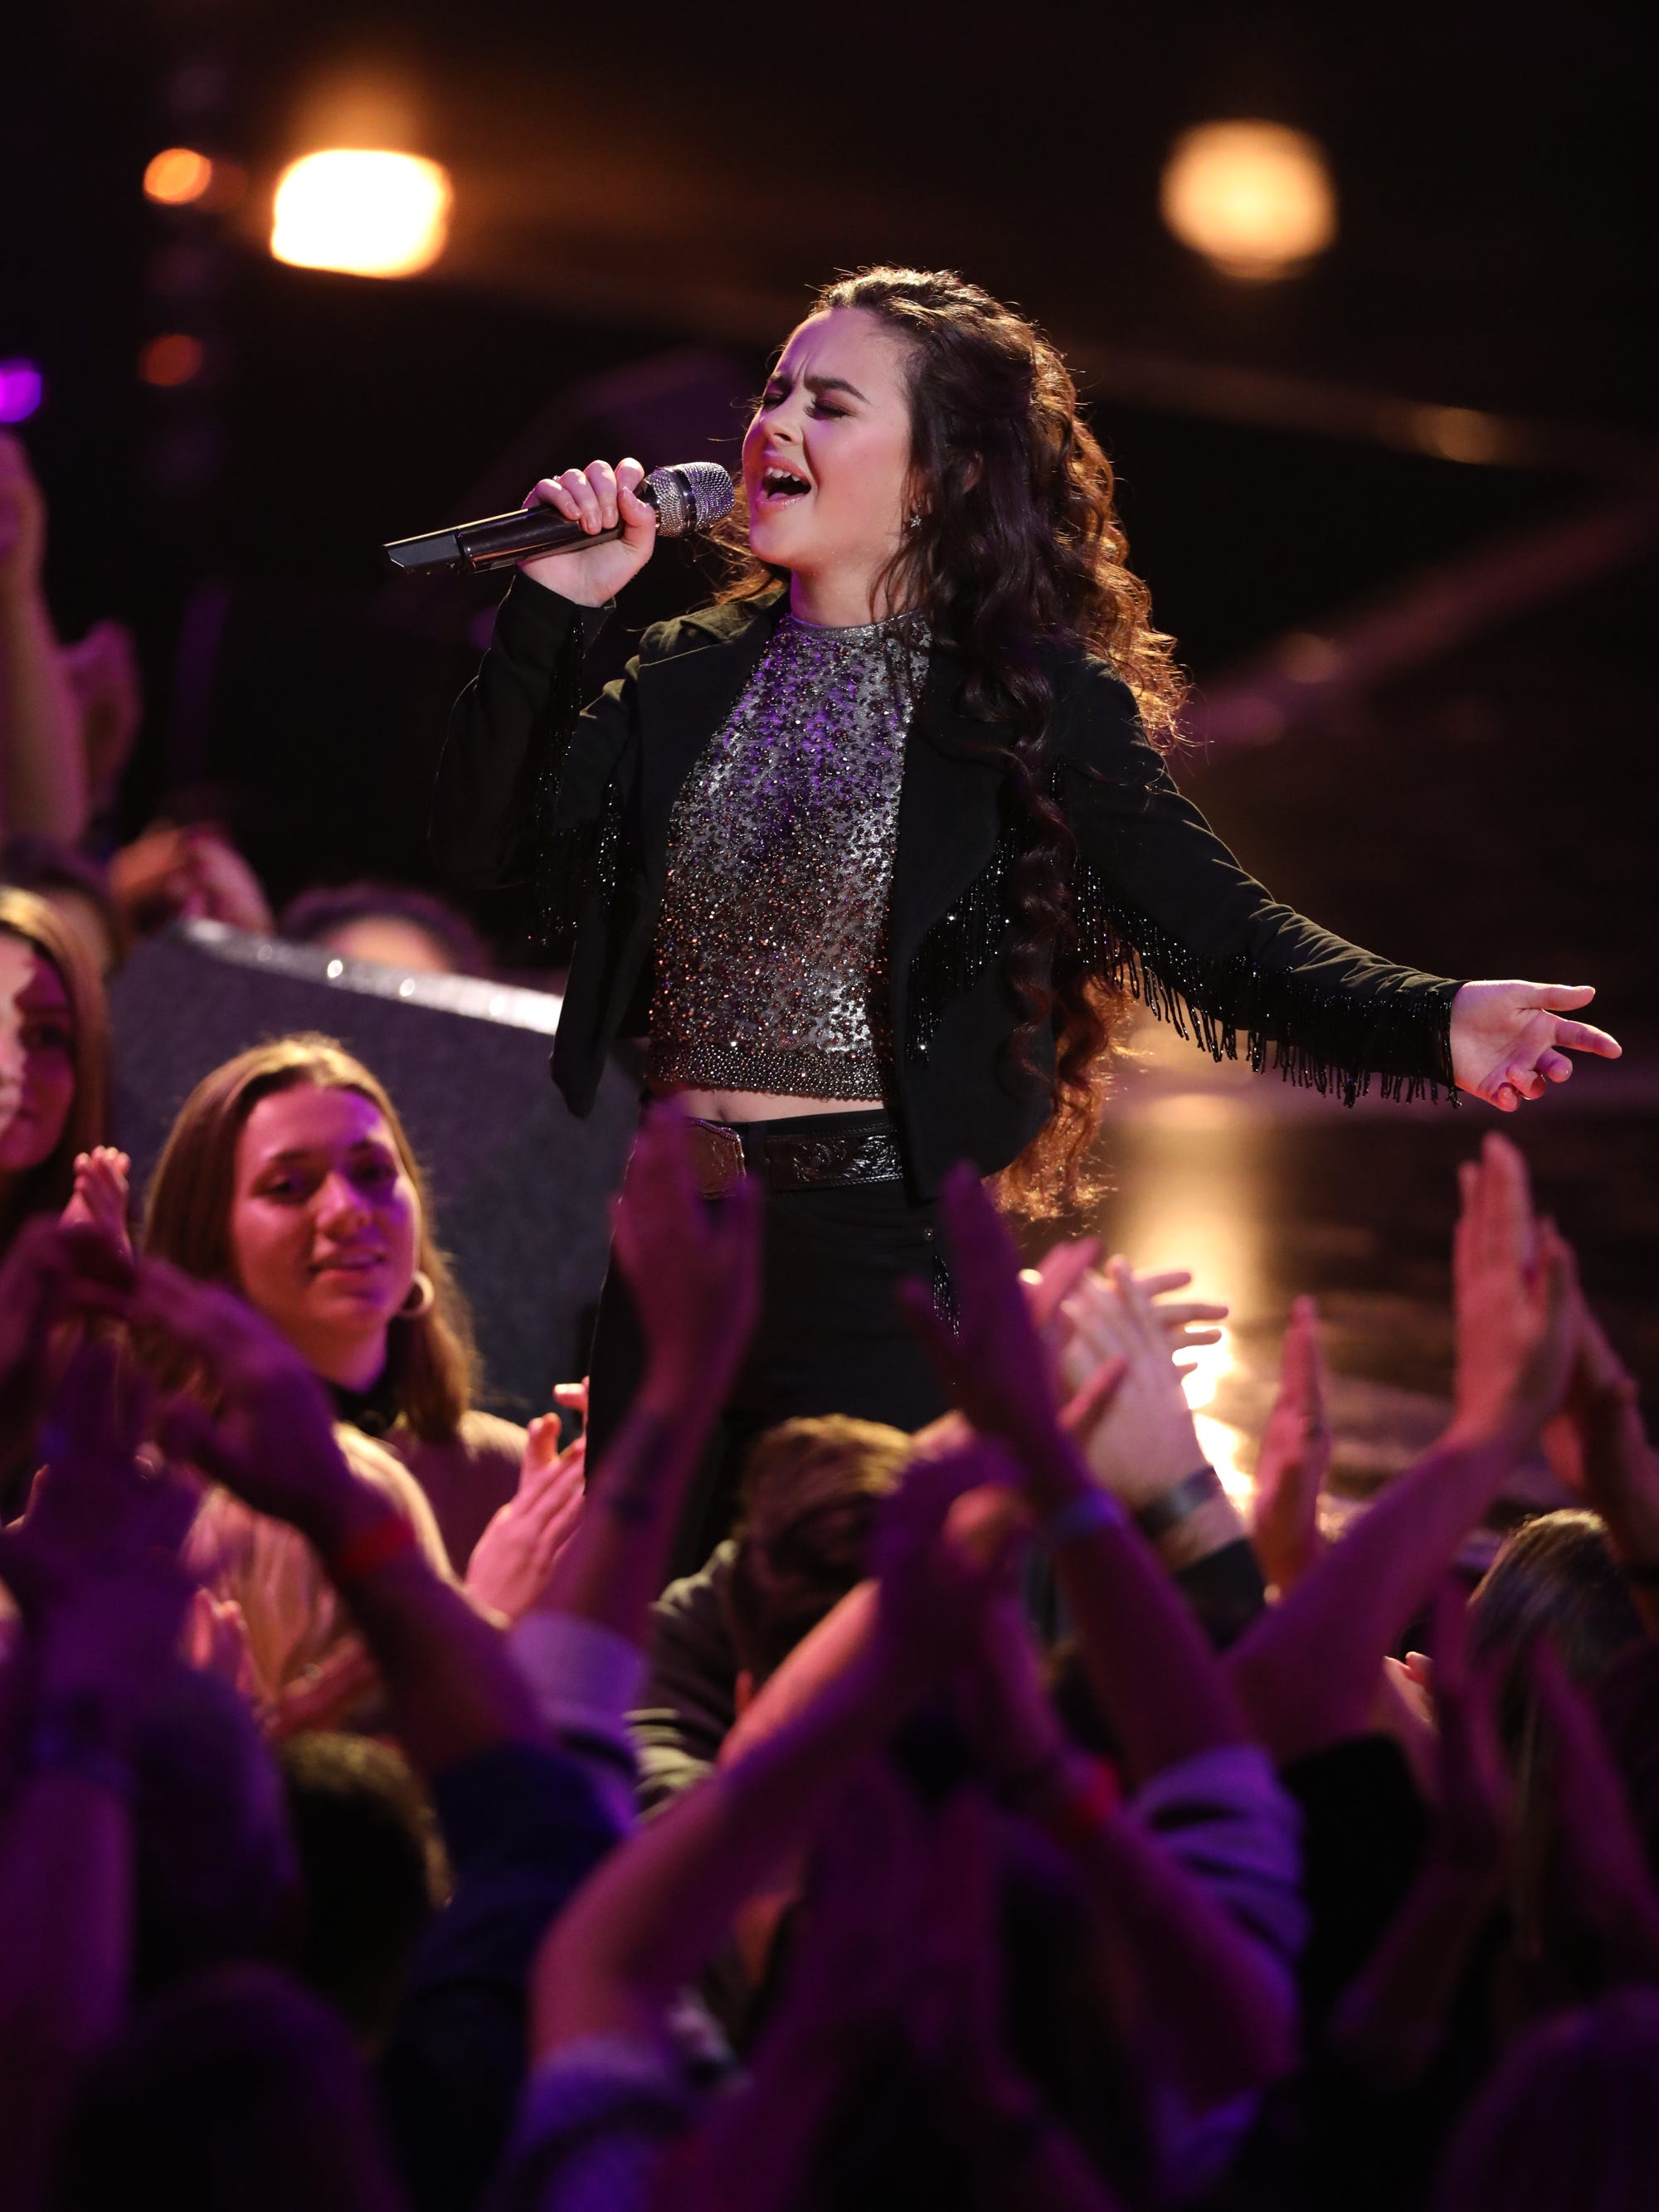 Chevel Shepherd delivers a performance of "It's a Little Too Late" during Monday's night competition on "The Voice."